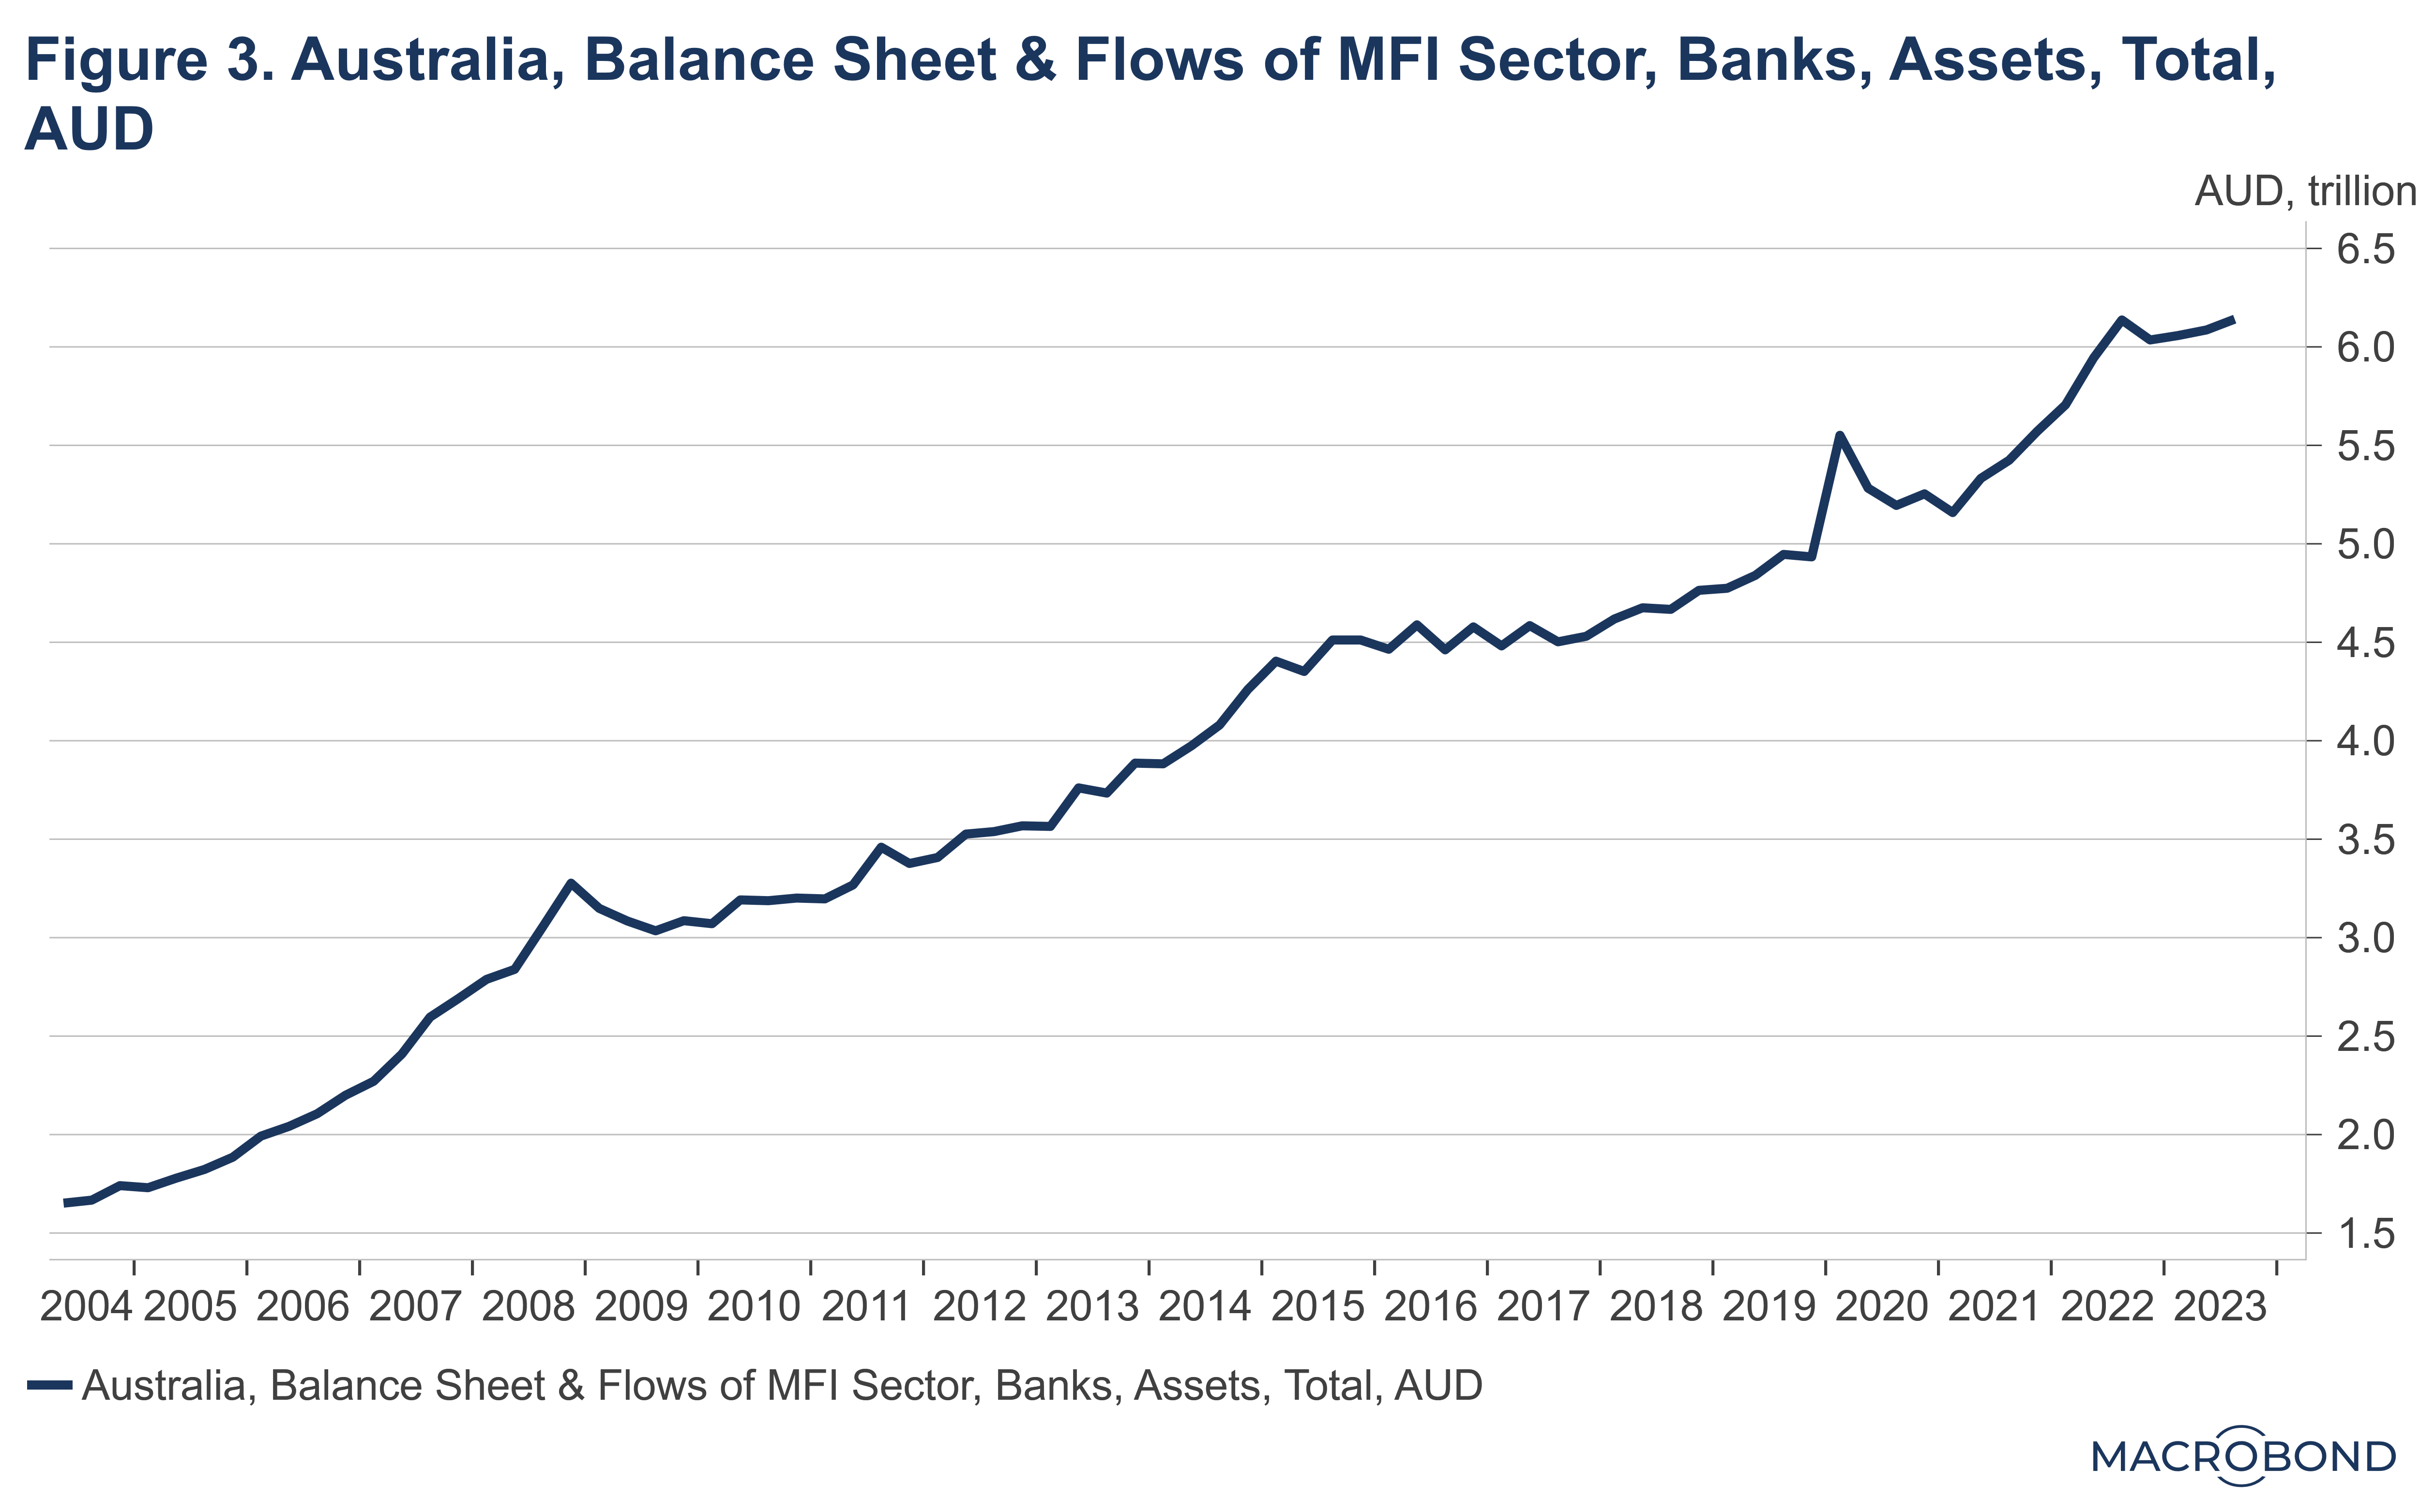 Chart showing how Australian bank assets have been growing, but not an obviously crazily high rate that bank assets did in Iceland.